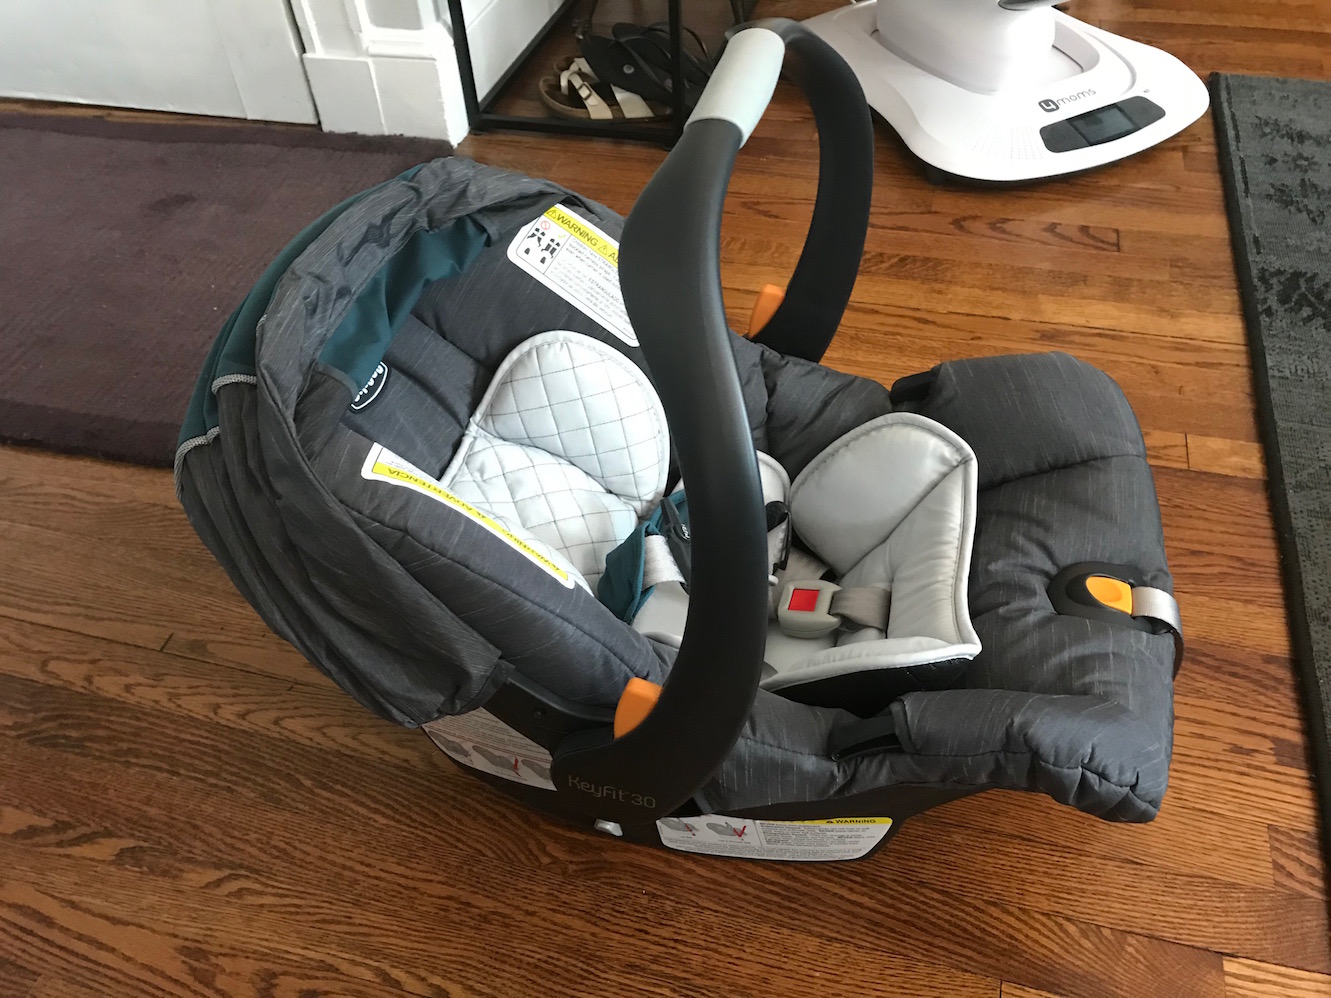 Baby carrier seat